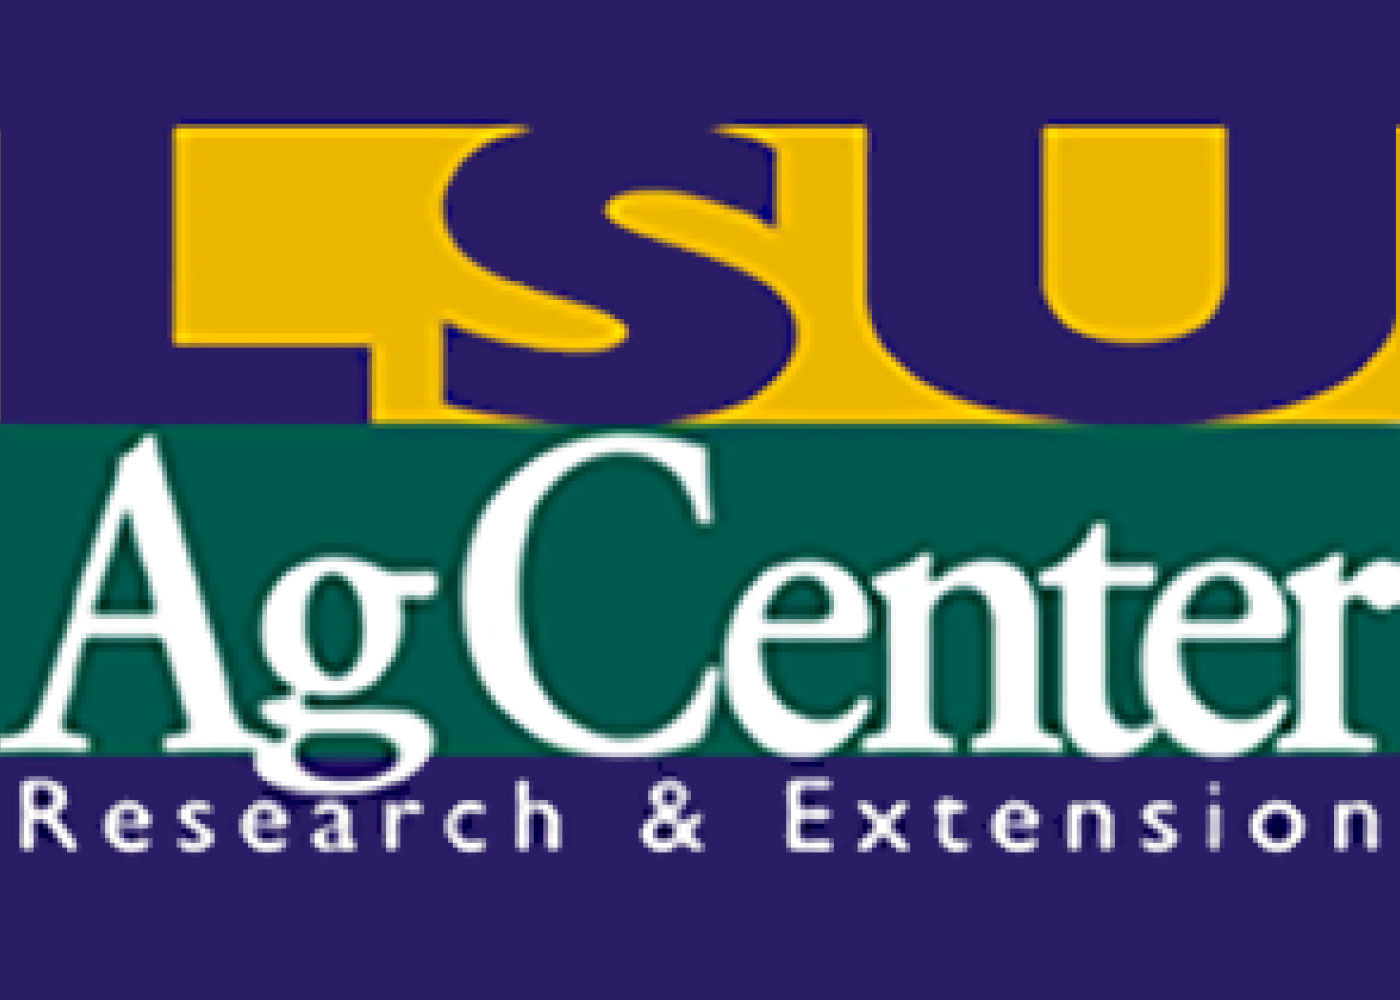 LSU Ag Center Research & Extension